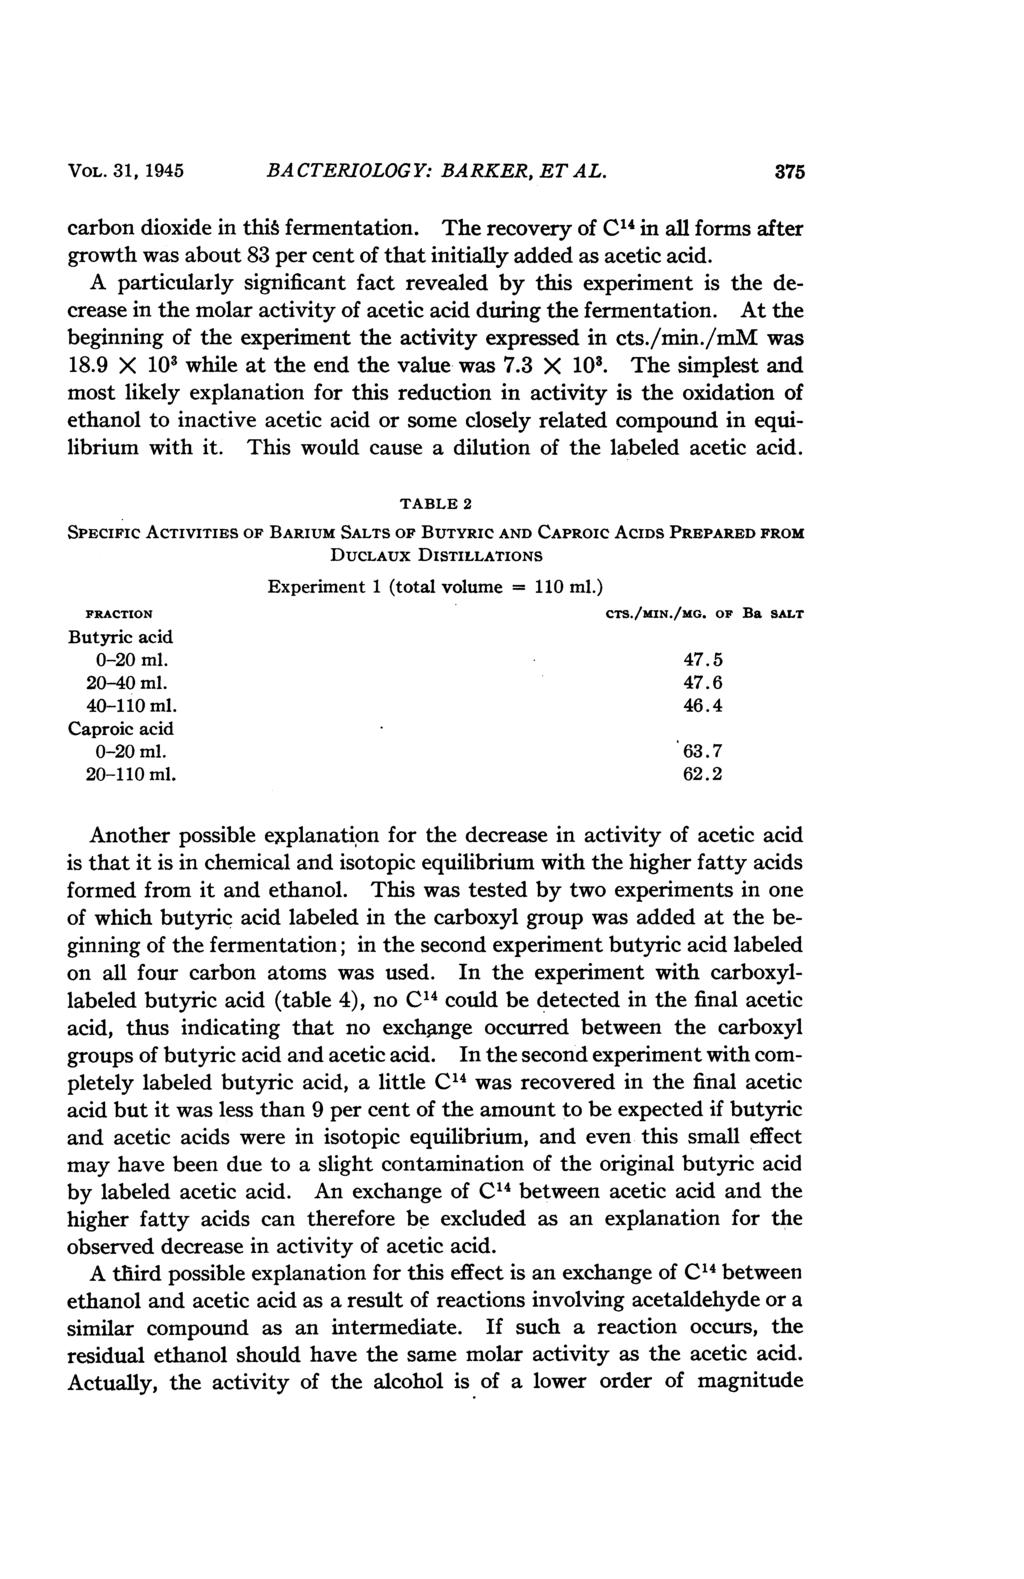 VOL. 31, 1945 BACTERIOLOGY: BARKER, ETAL. 375 carbon dioxide in thit fermentation. The recovery of C14 in all forms after growth was about 83 per cent of that initially added as acetic acid.